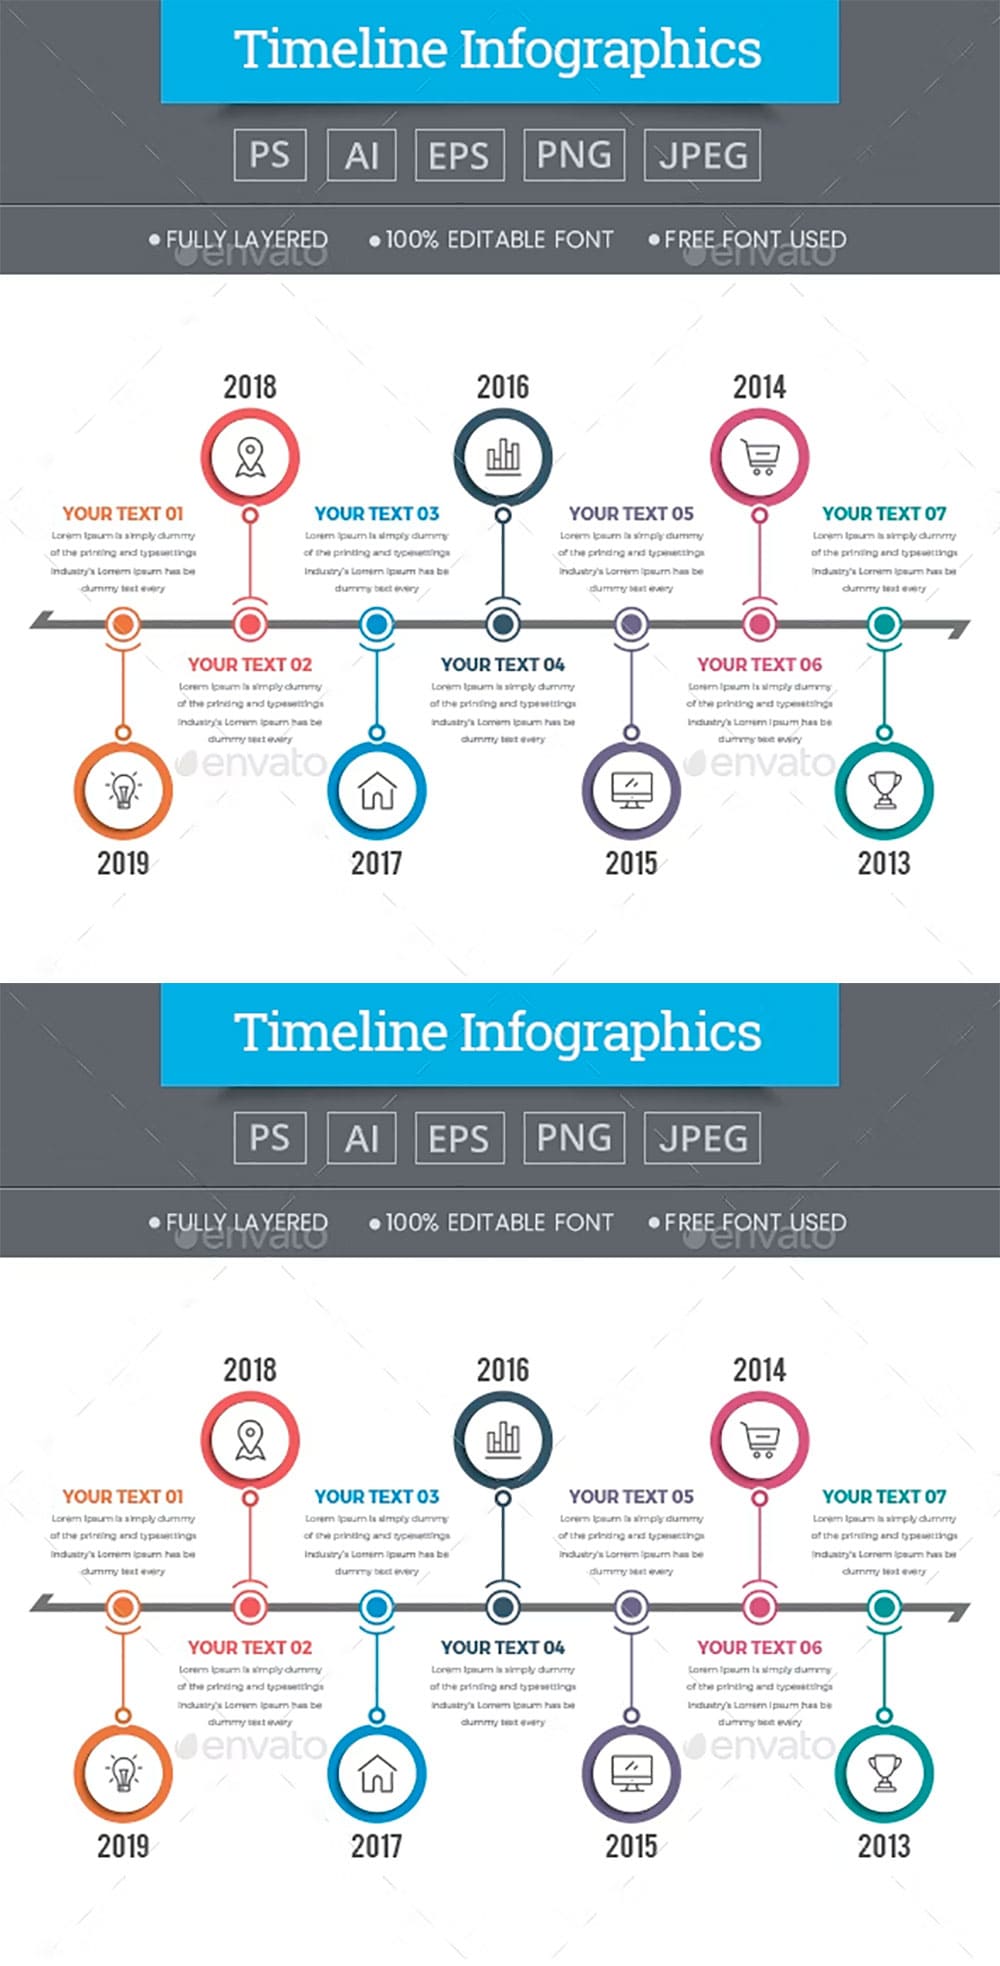 Timeline infographics 598, picture for pinterest.